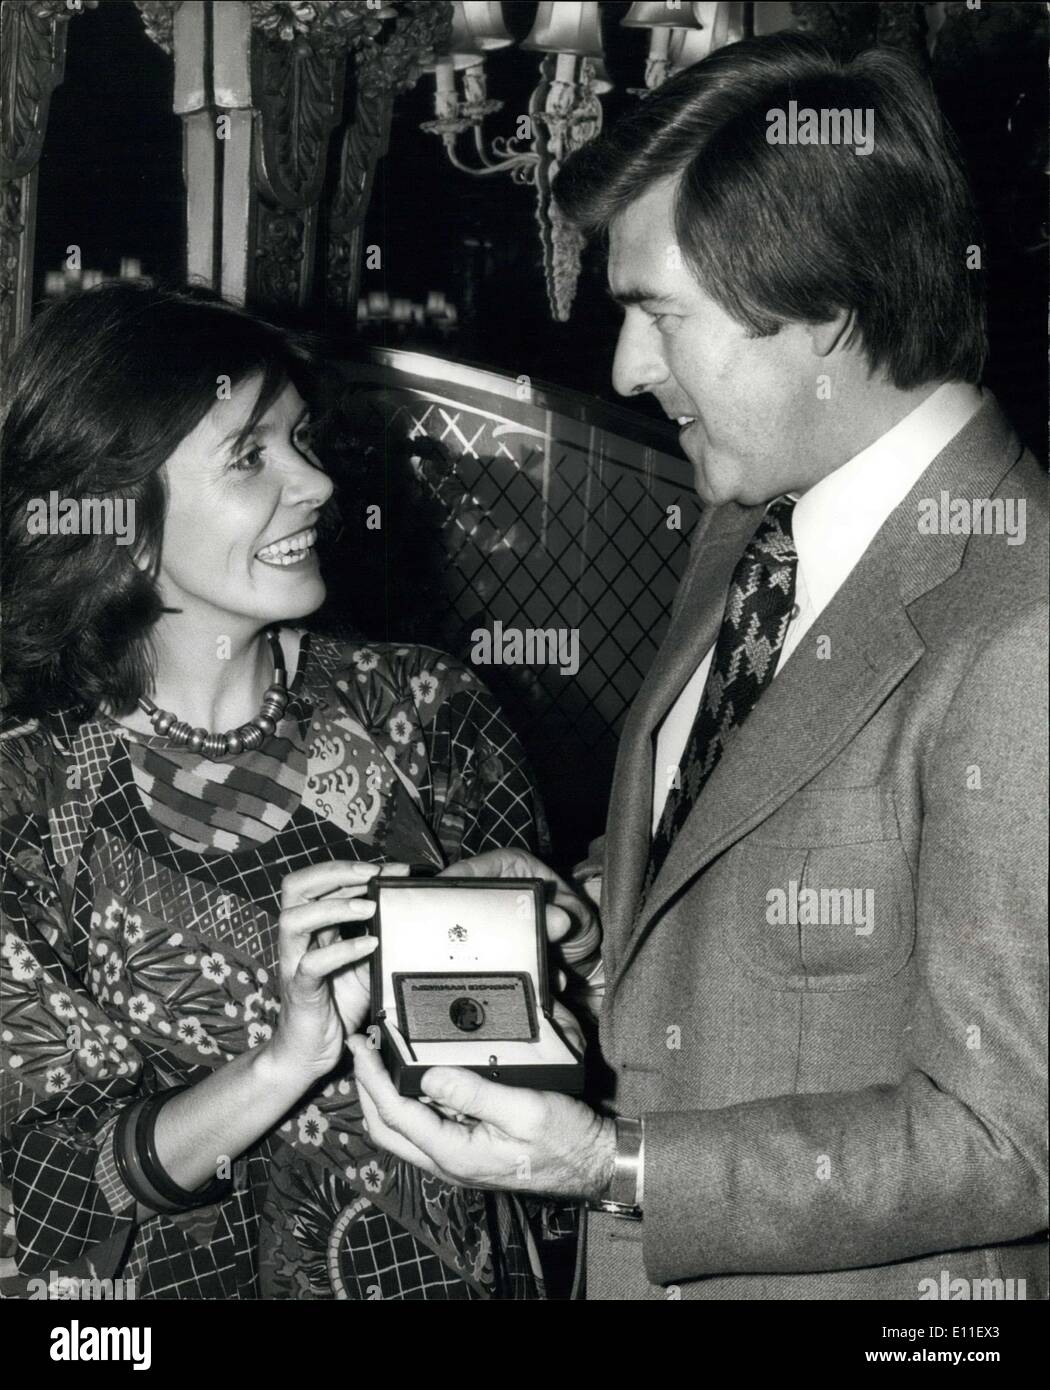 Oct. 10, 1977 - Television Personality Joan Bakerfield becomes 300,000th American Express U.K. Cardmember.: Populate T.V. personality Joan baker has become the 300,000th American Express Cardmember in the United Kingdom. To mark the event, Don McCrickard, Resident Vice President of the American Express Card Divison presented Miss Bakewell with a solid gold replics of the Card at a lunch at the Cafe Royale in London. The presentation could not have come at a more appropriate time. By Coincidence, Miss Bakewell's book The Complete Traveler is to be published later this month Stock Photo